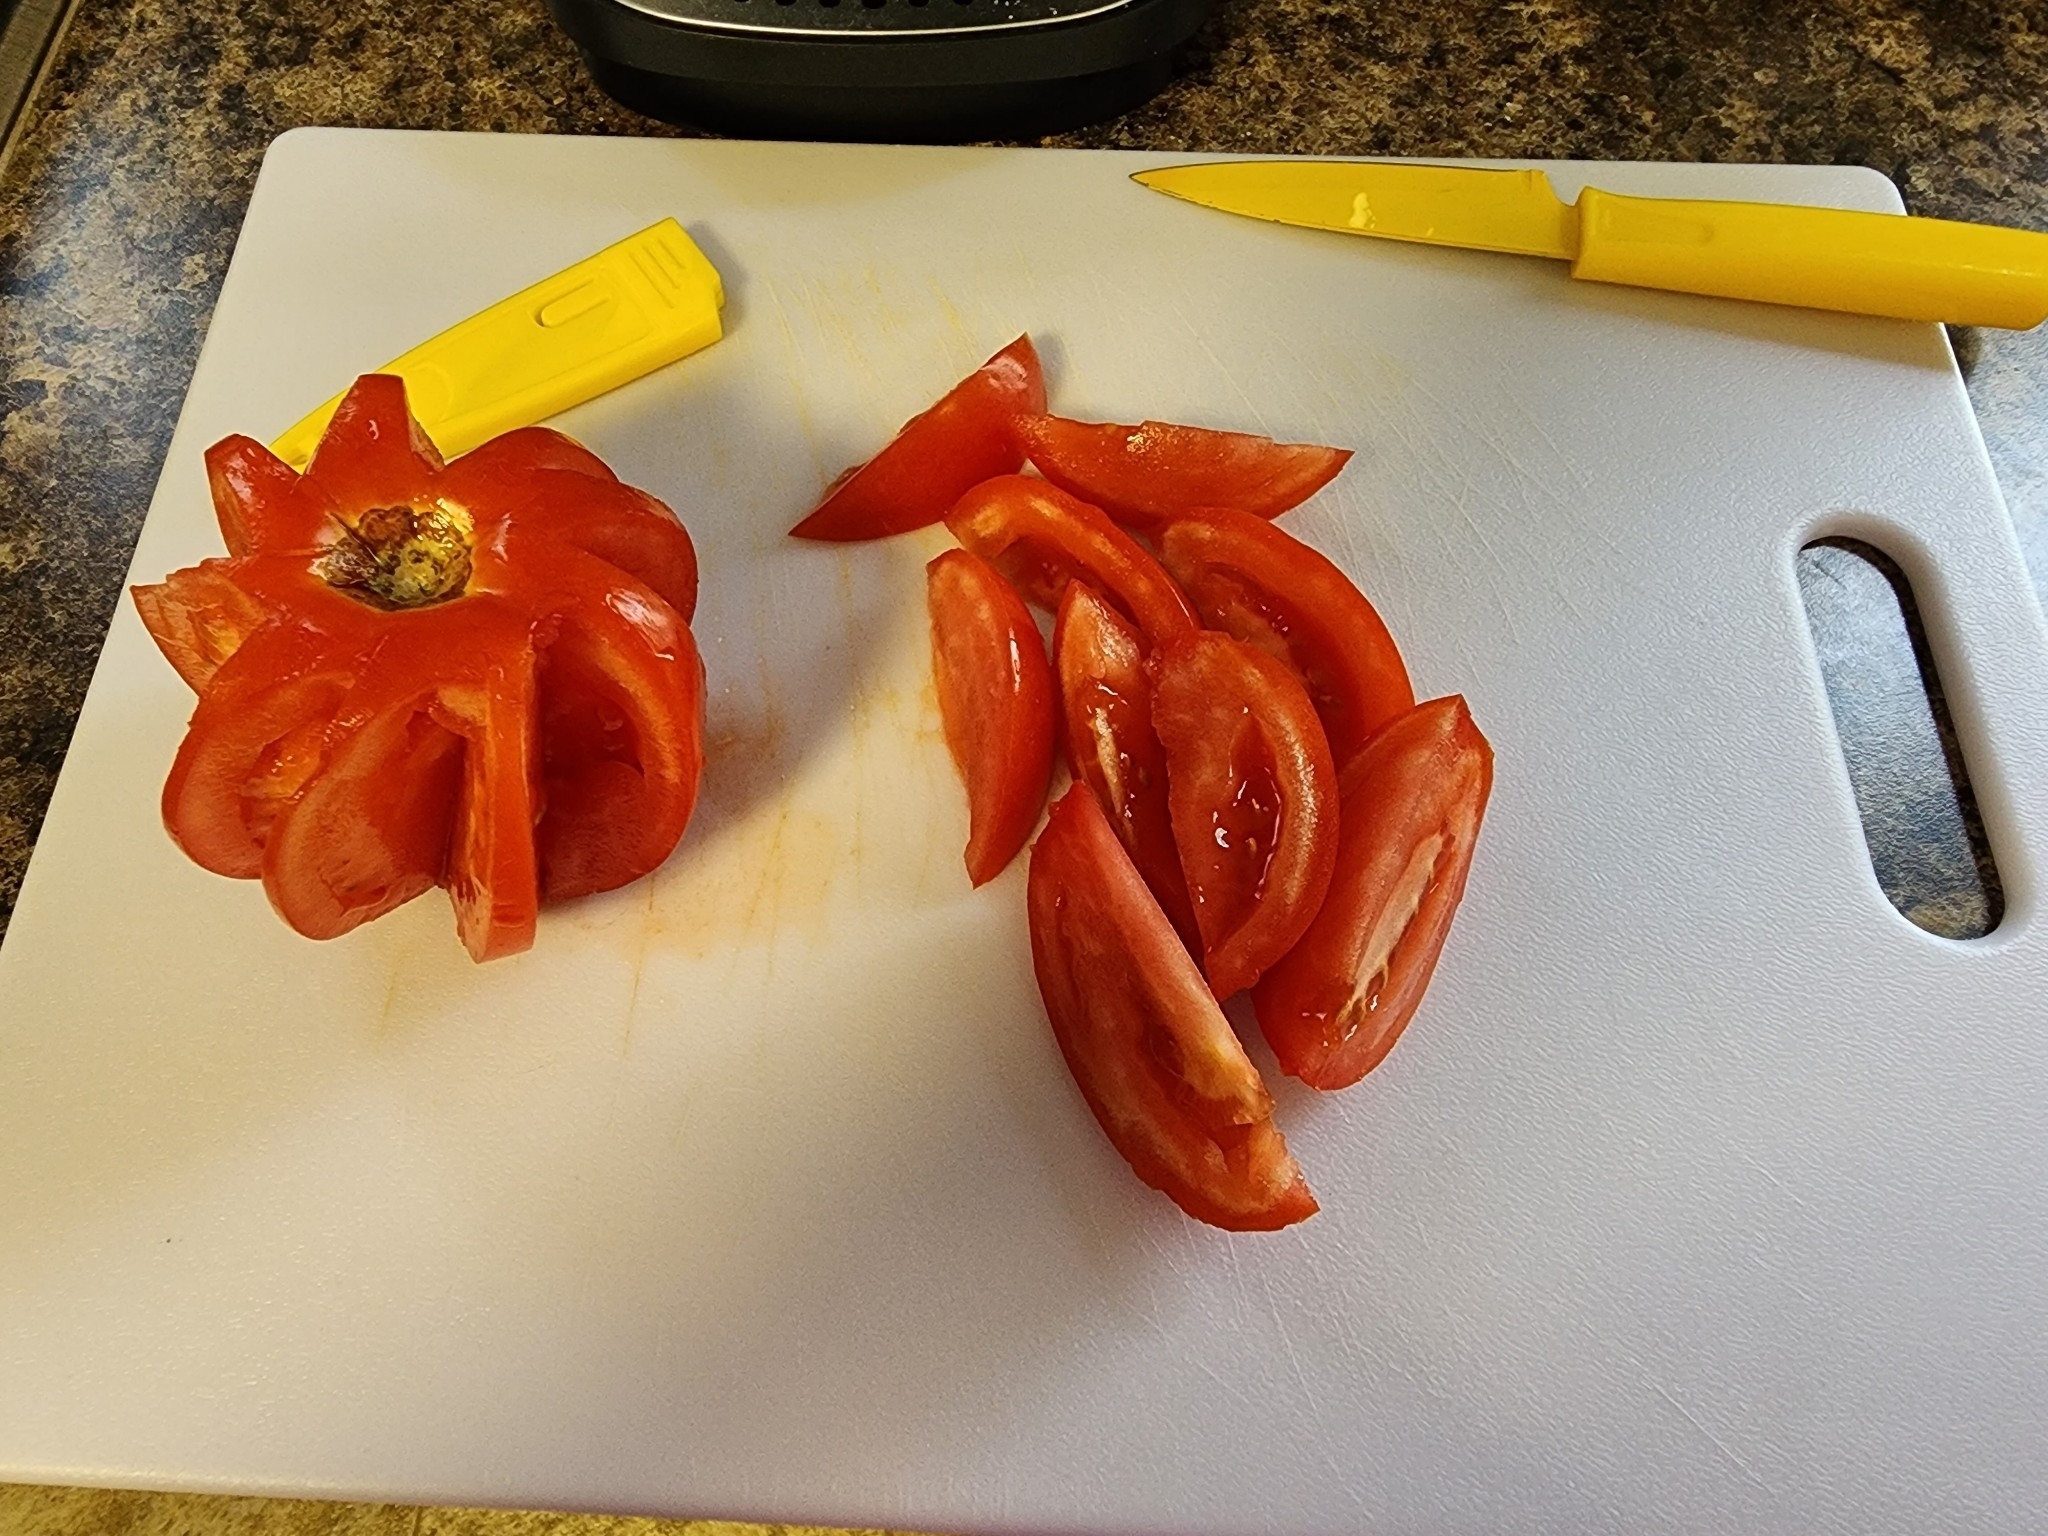 A tomato chopped roughly